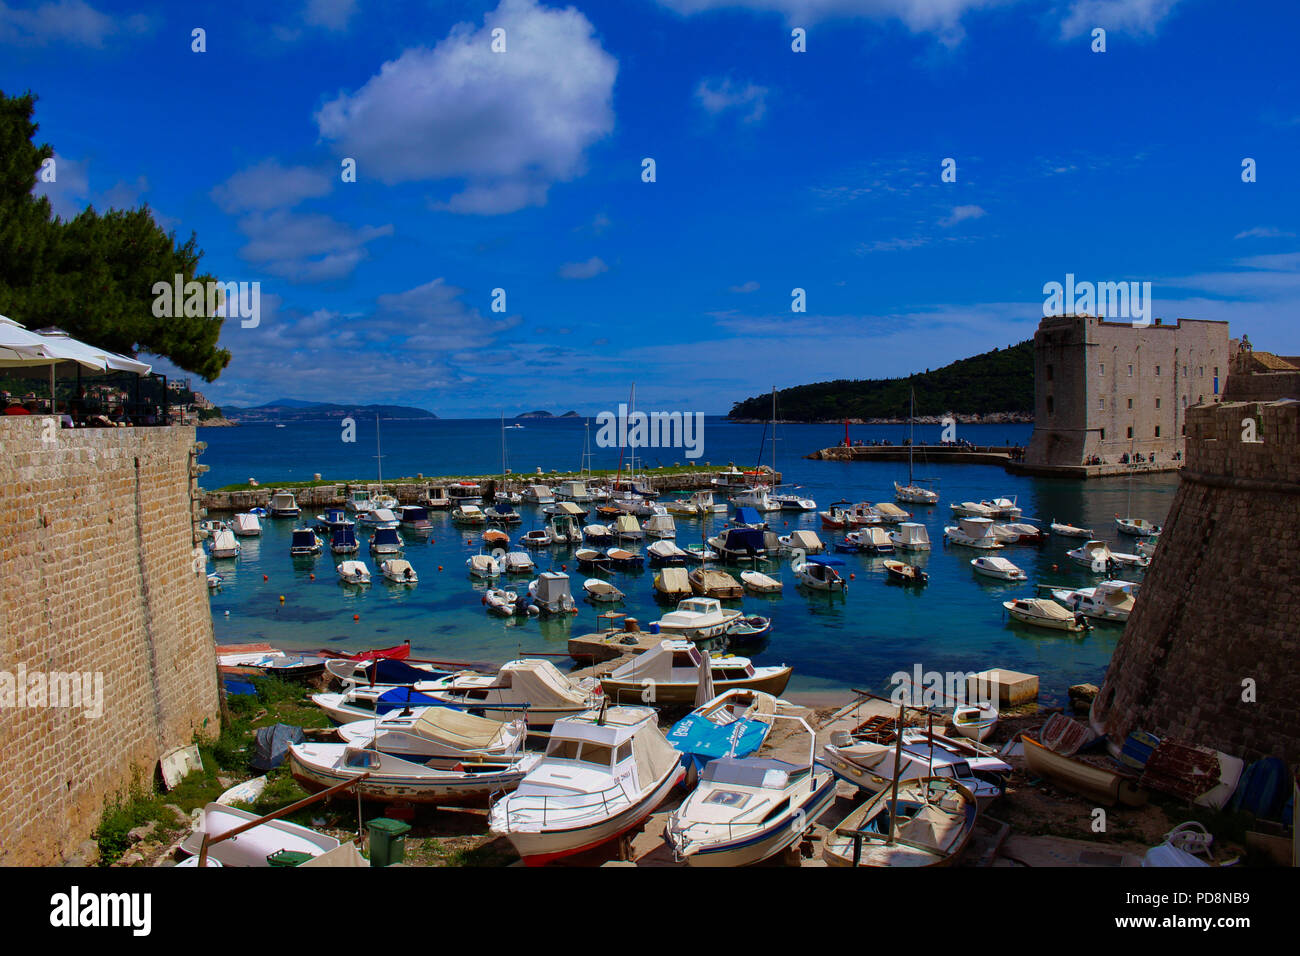 A view towards the harbor of the old town of Dubrovnik, Croatia and the Adriatic sea from the city walls Stock Photo